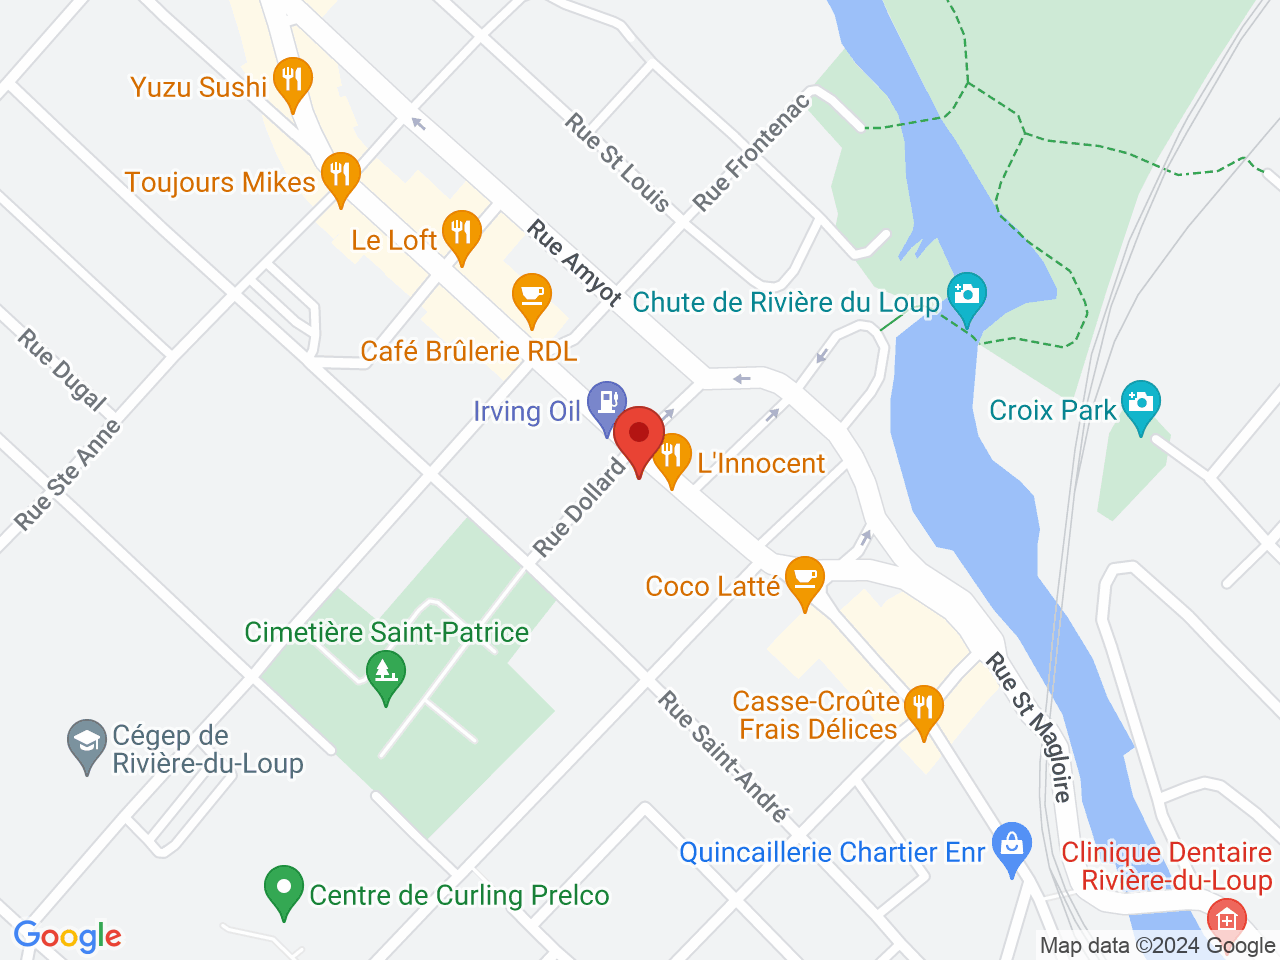 Street map for SQDC Riviere-du-Loup, 450 rue Lafontaine, Riviere-du-Loup QC